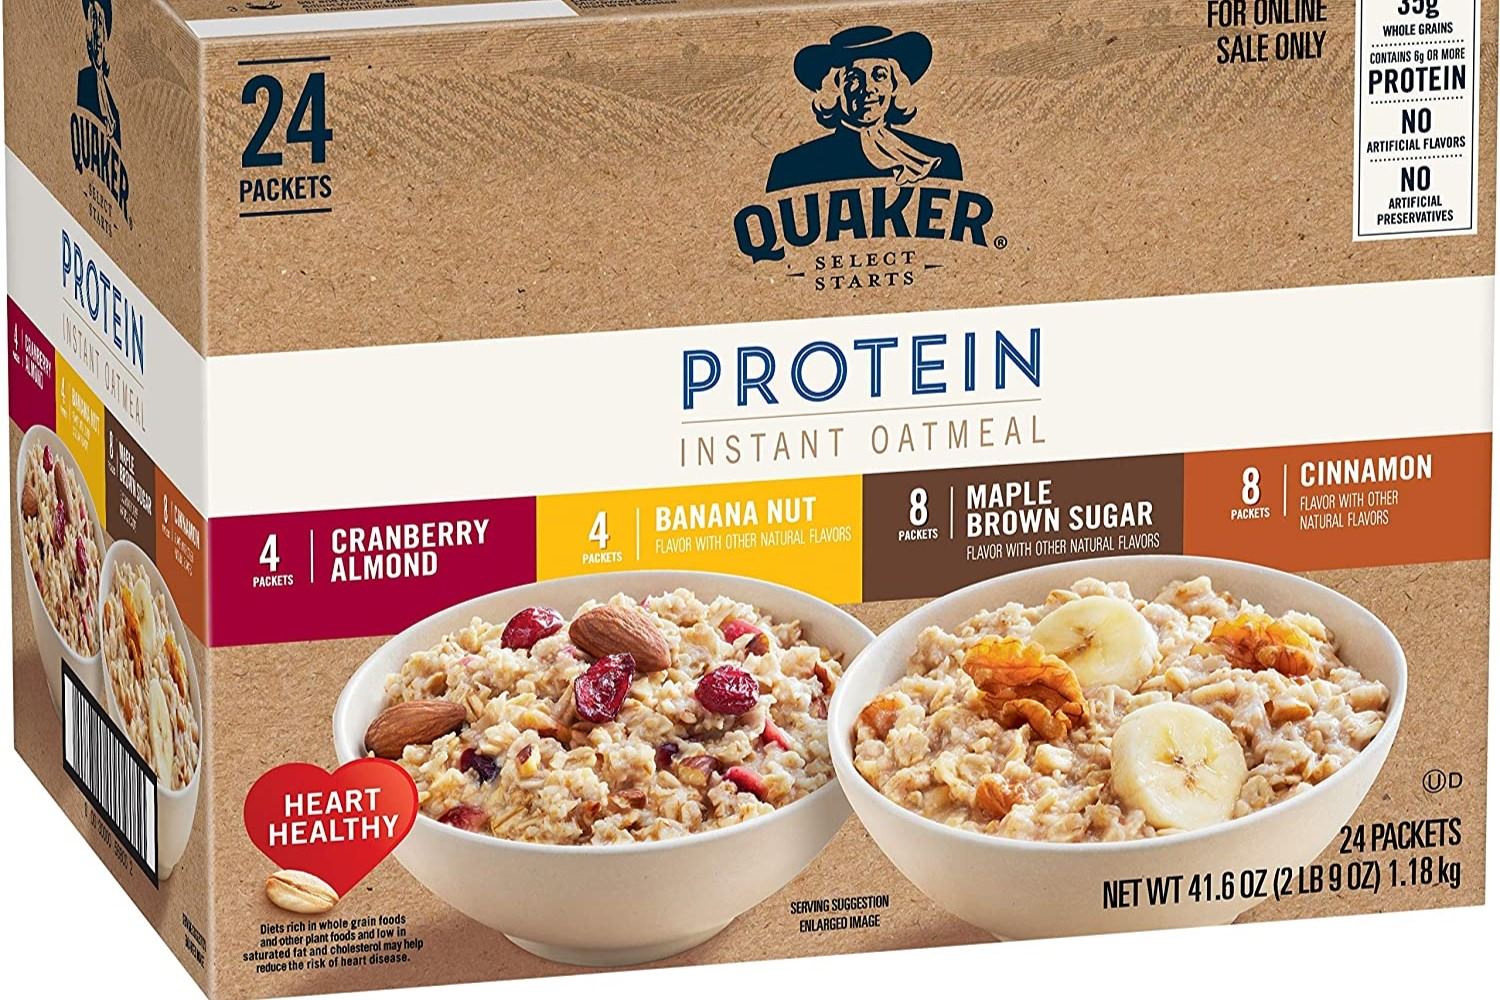 20-protein-quaker-oatmeal-nutrition-facts